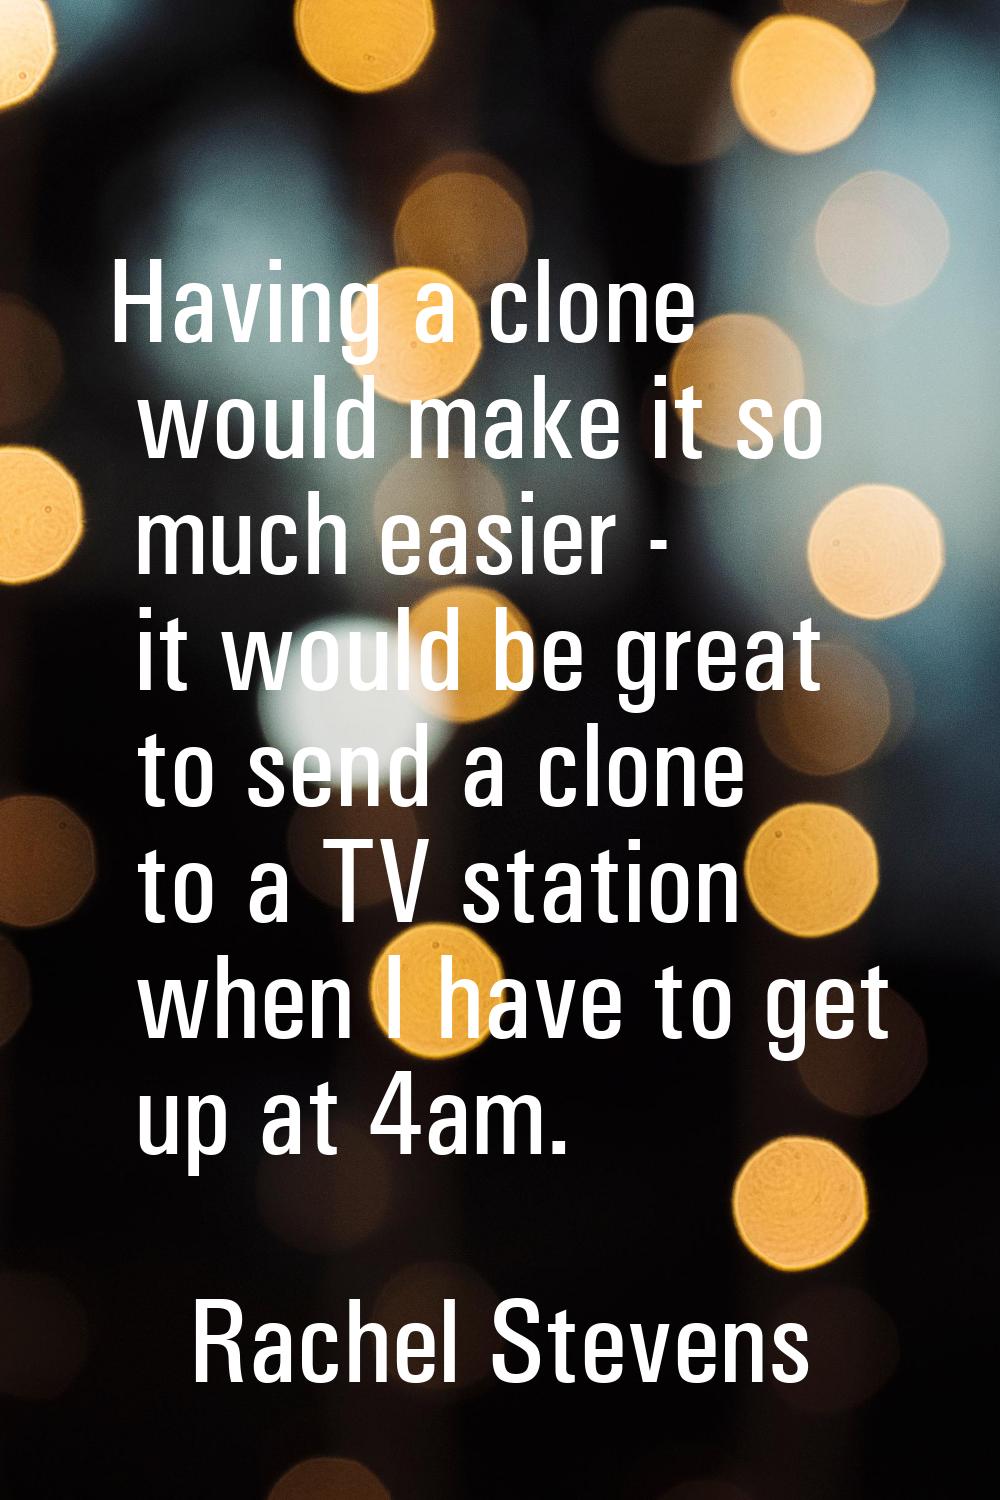 Having a clone would make it so much easier - it would be great to send a clone to a TV station whe